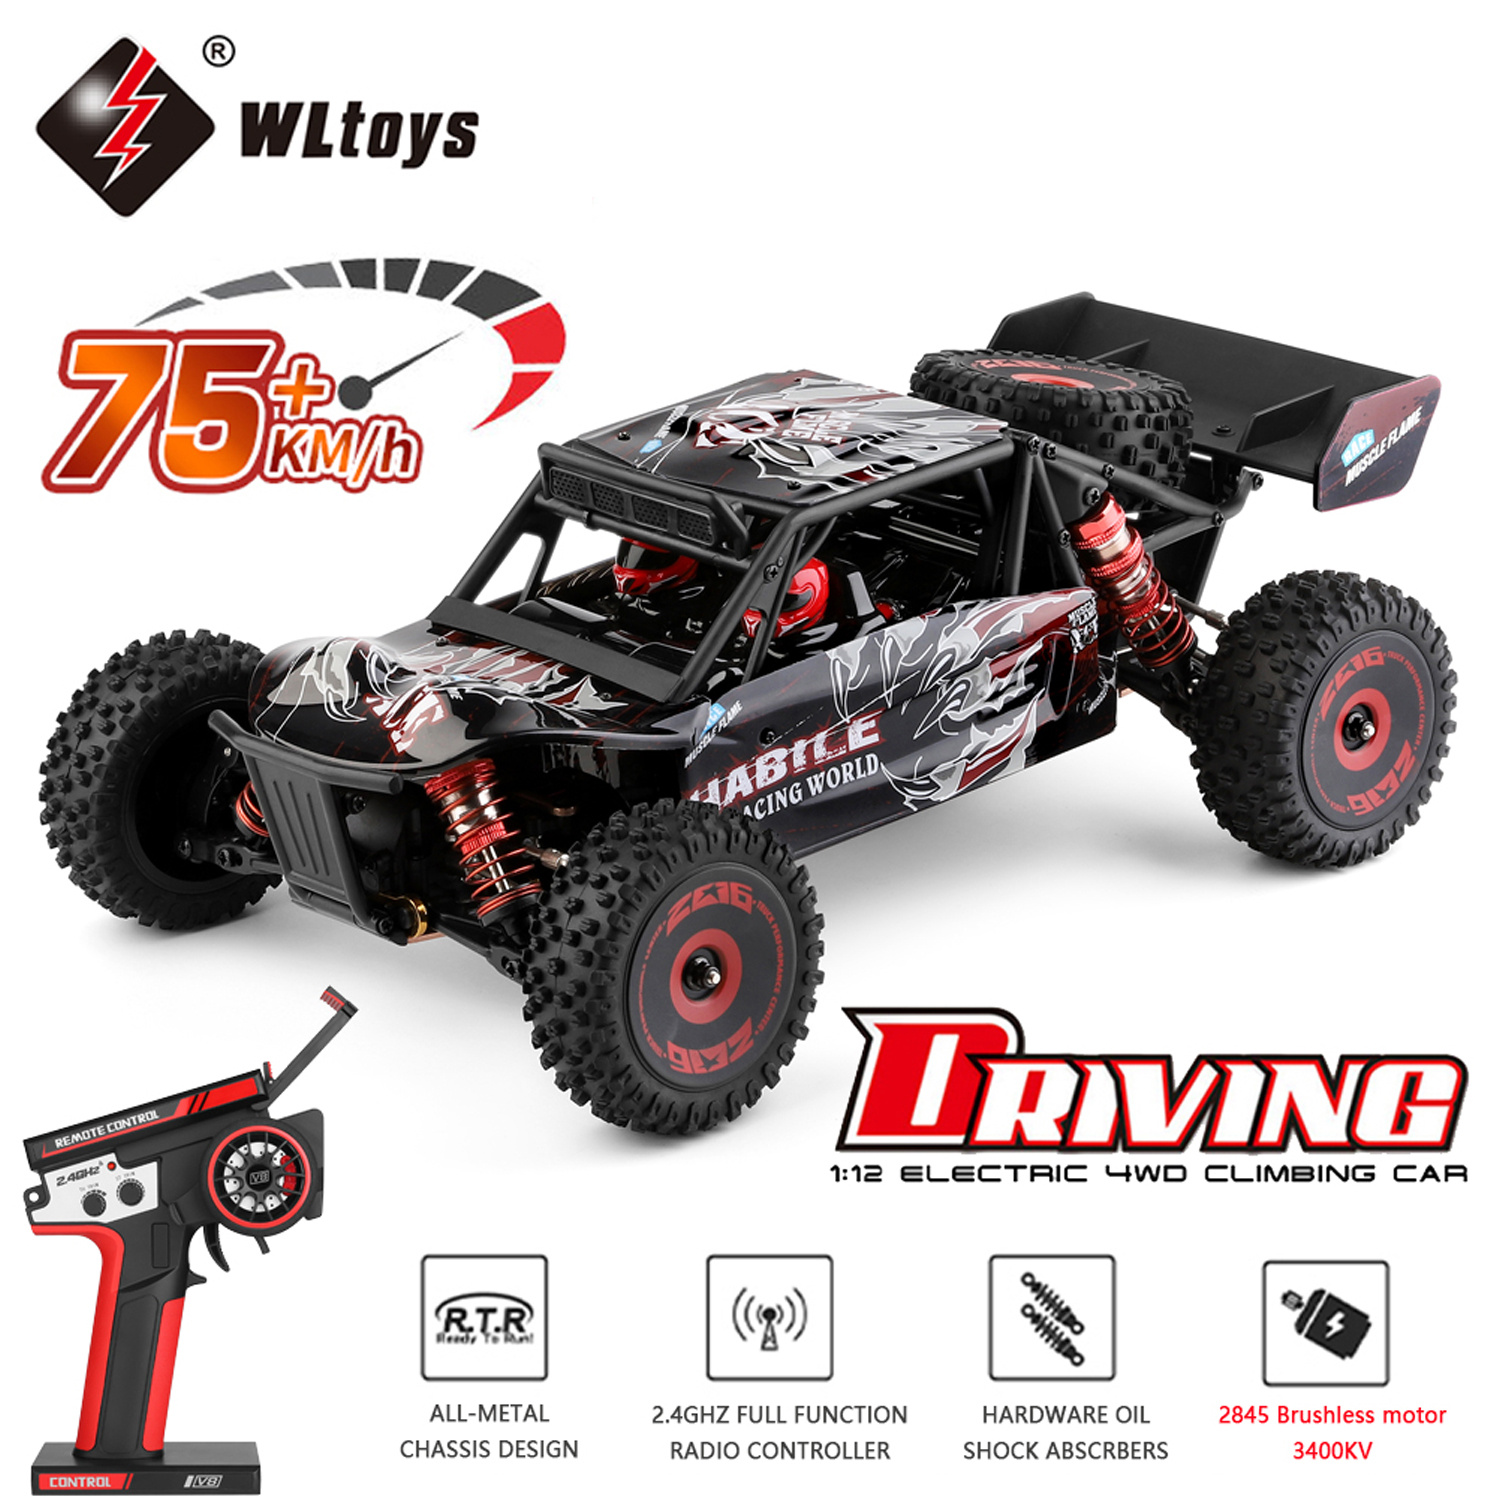 75KMH Brushless RC Car, Wltoys 144010 Remote Control Car, Wltoys 144001  Upgrade Brushless Motor, Top Speed 4WD 1:14 Buggy with Metal Chassis,2  Battery